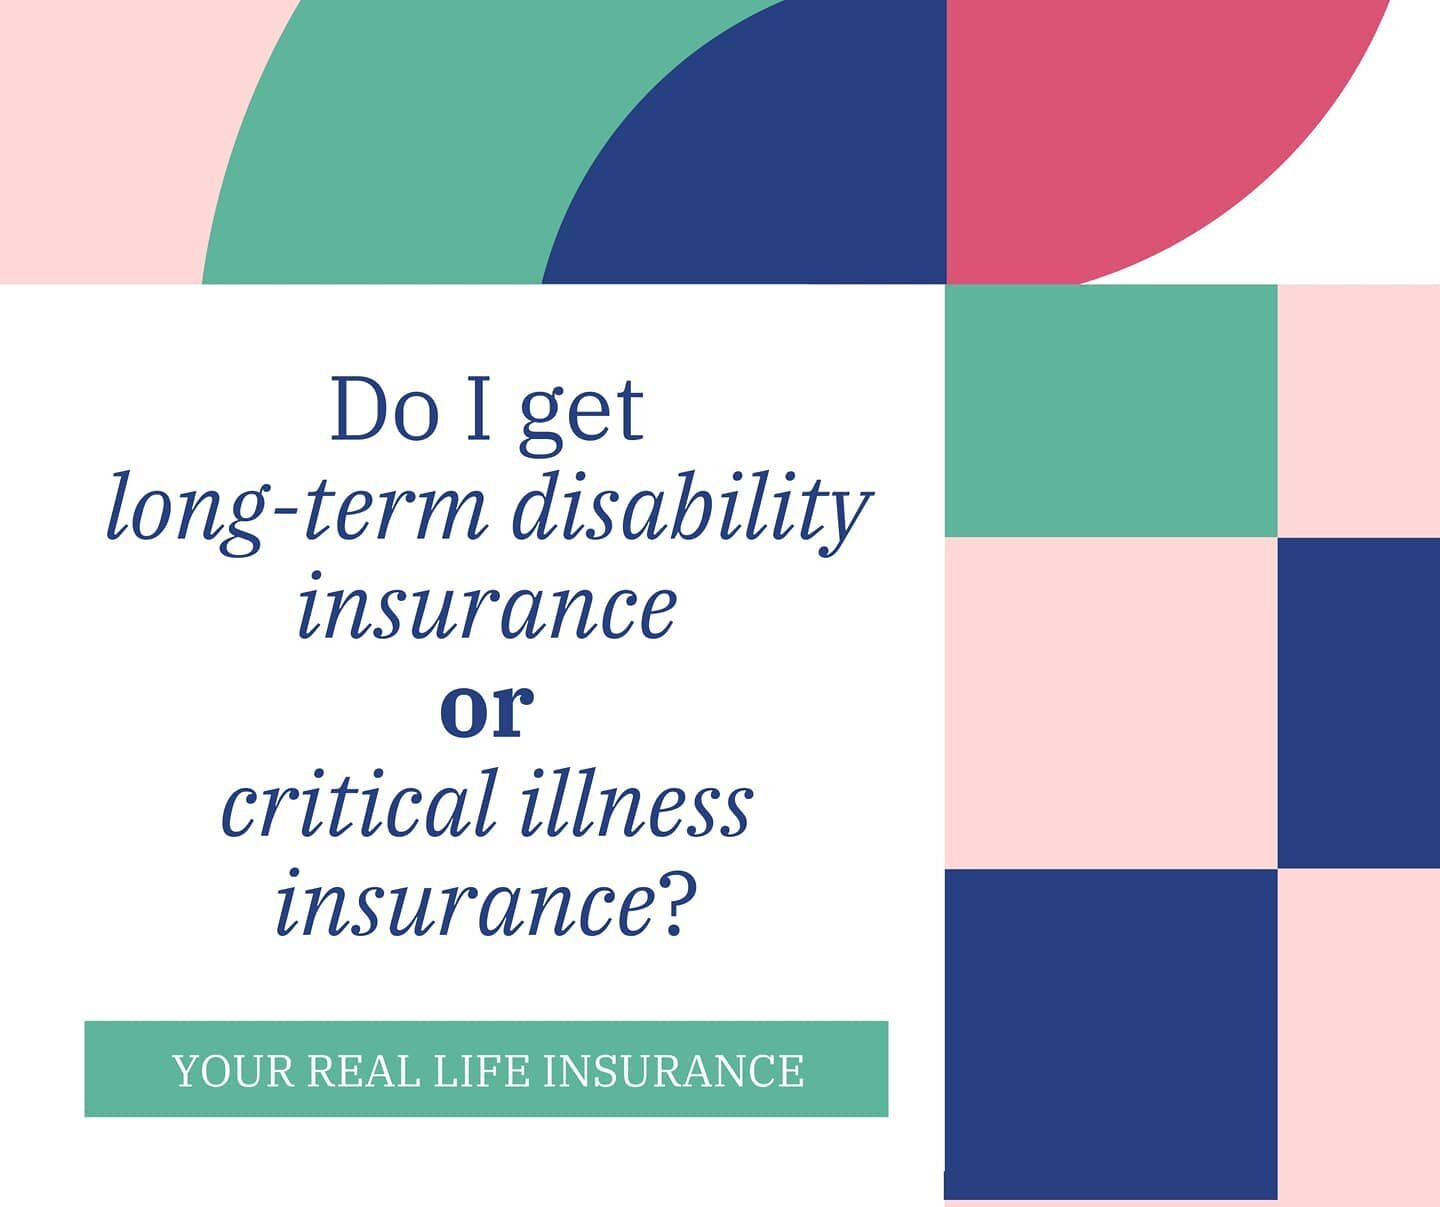 Critical illness or long-term disability insurance can make a big difference for you and your recovery in times of uncertainty.

Both LTD and CI pay you money in case of an illness or disability, but they do it in different ways.

Make sure you under